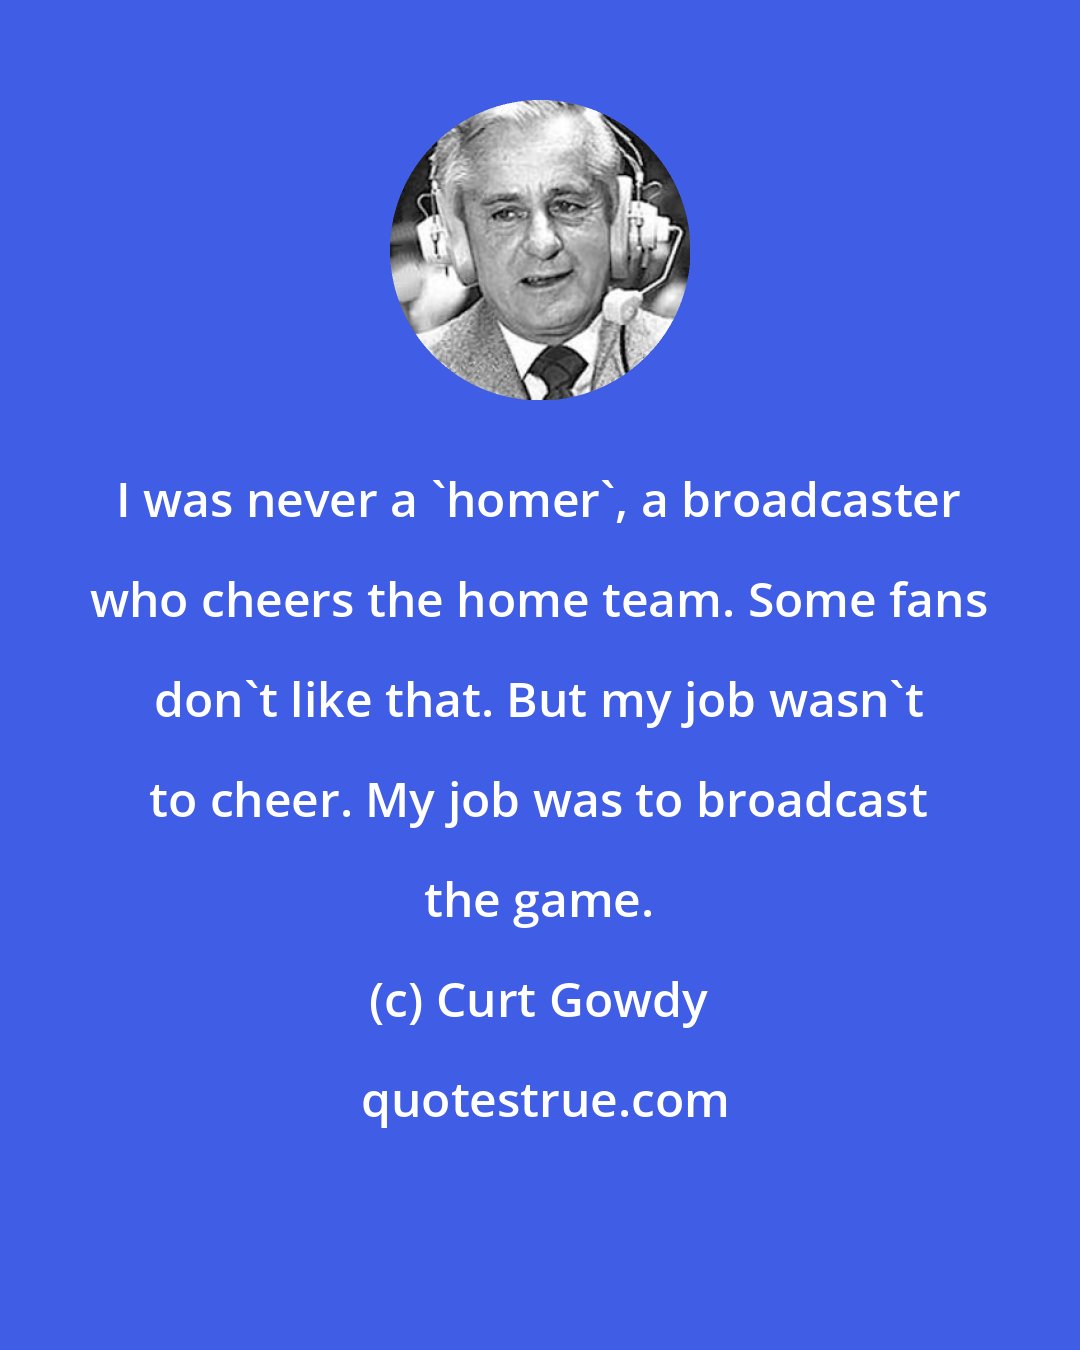 Curt Gowdy: I was never a 'homer', a broadcaster who cheers the home team. Some fans don't like that. But my job wasn't to cheer. My job was to broadcast the game.